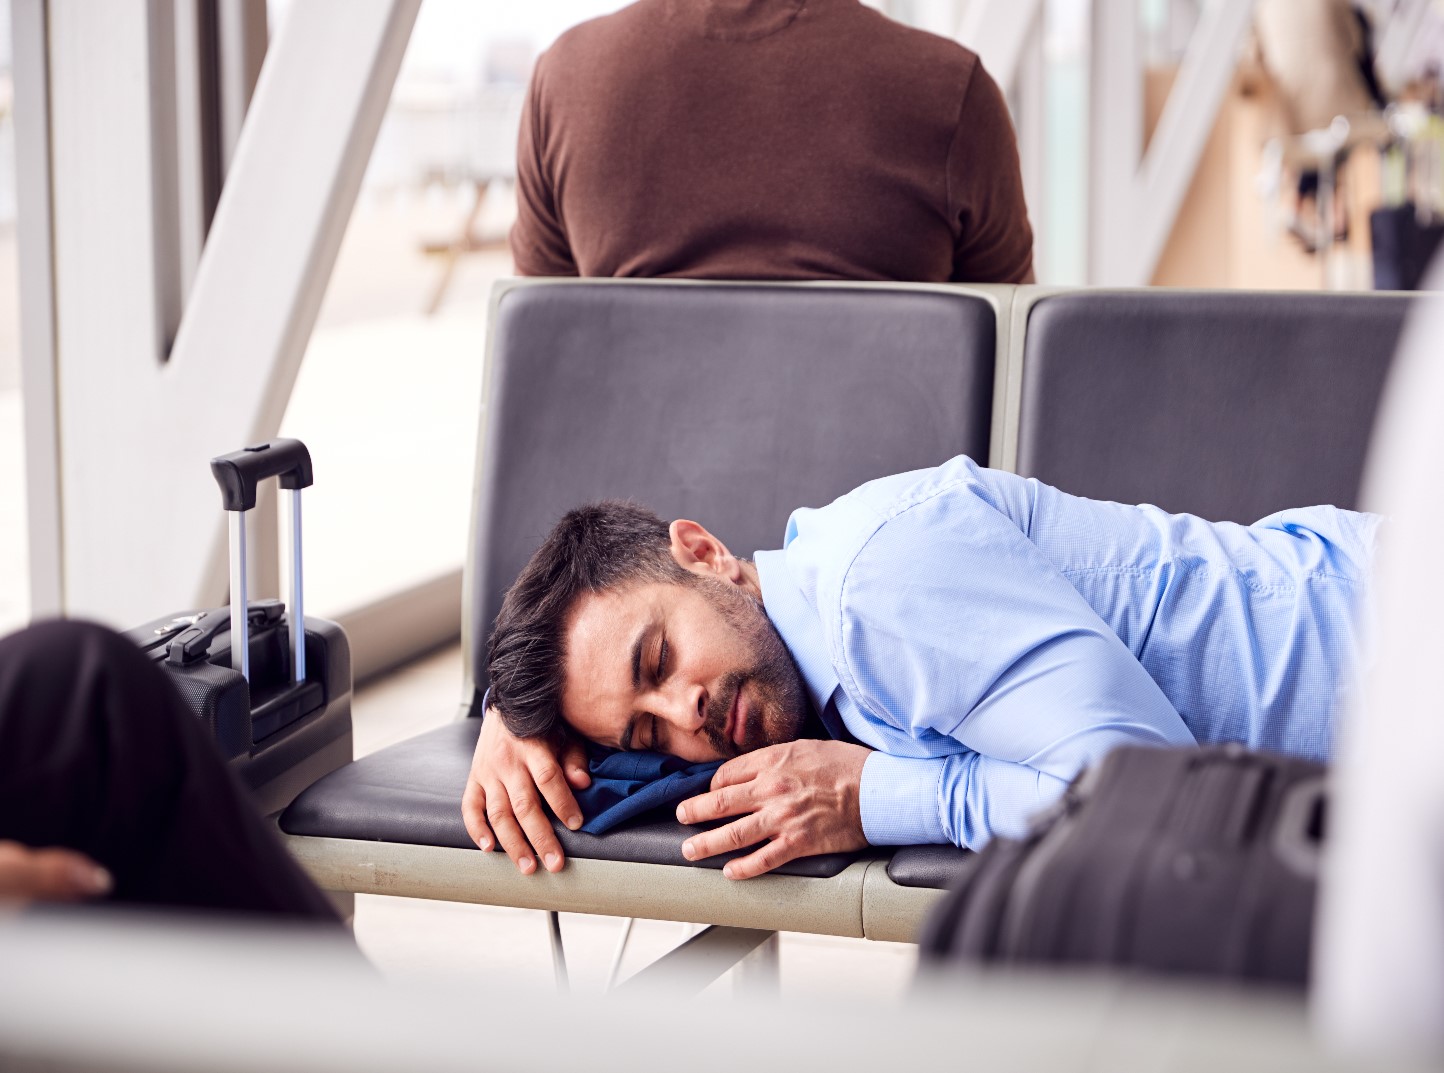 businessman-sleeping-on-seats-in-airport-T328QU4